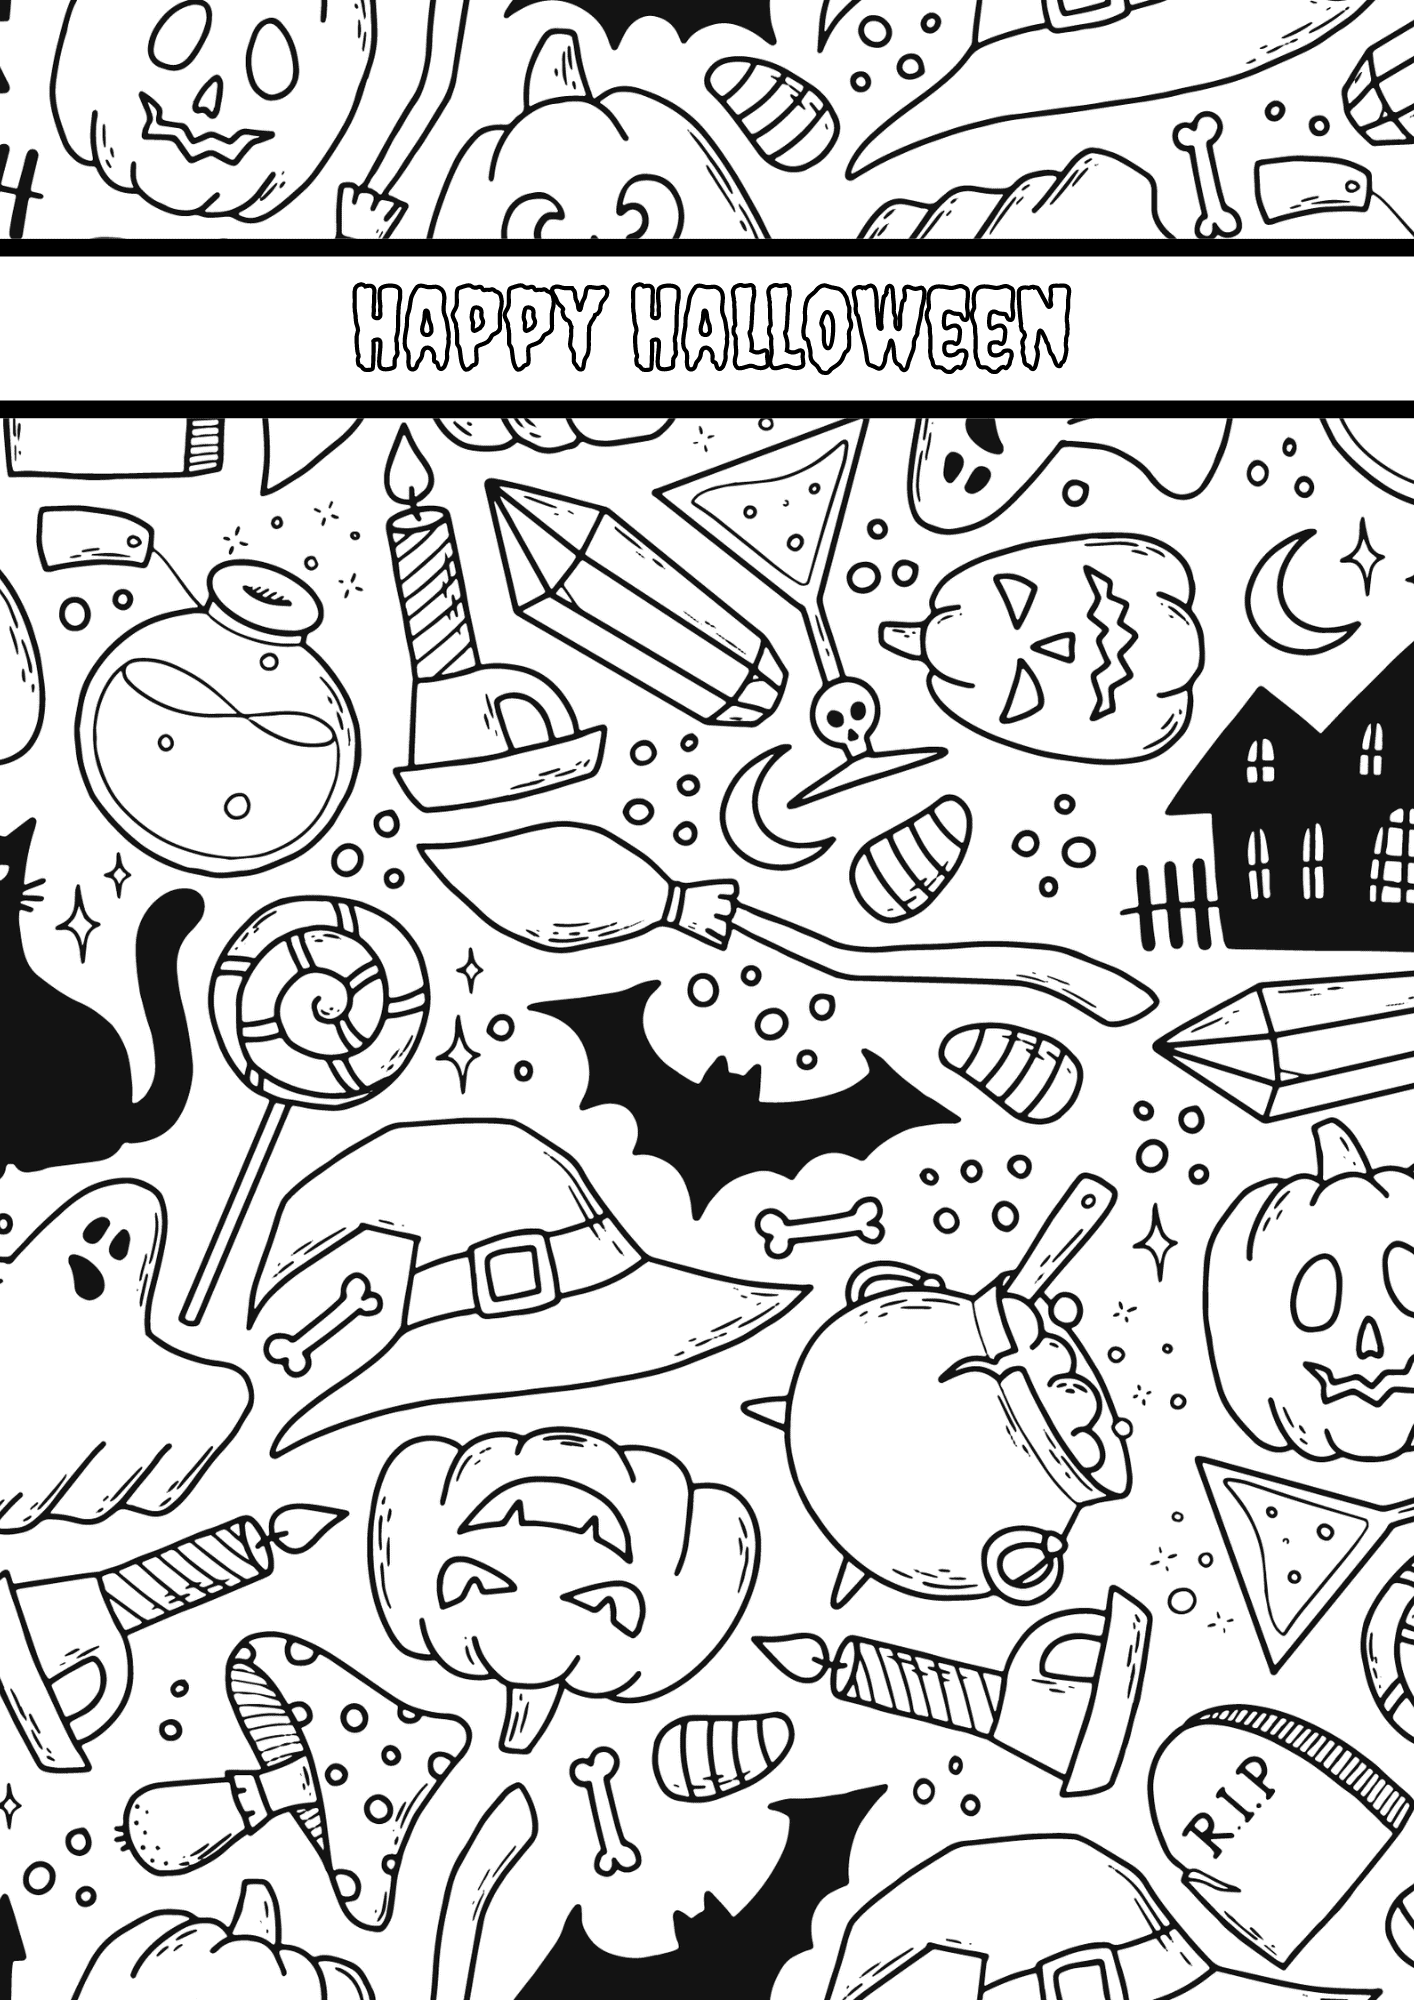 Black and White Halloween Coloring Page